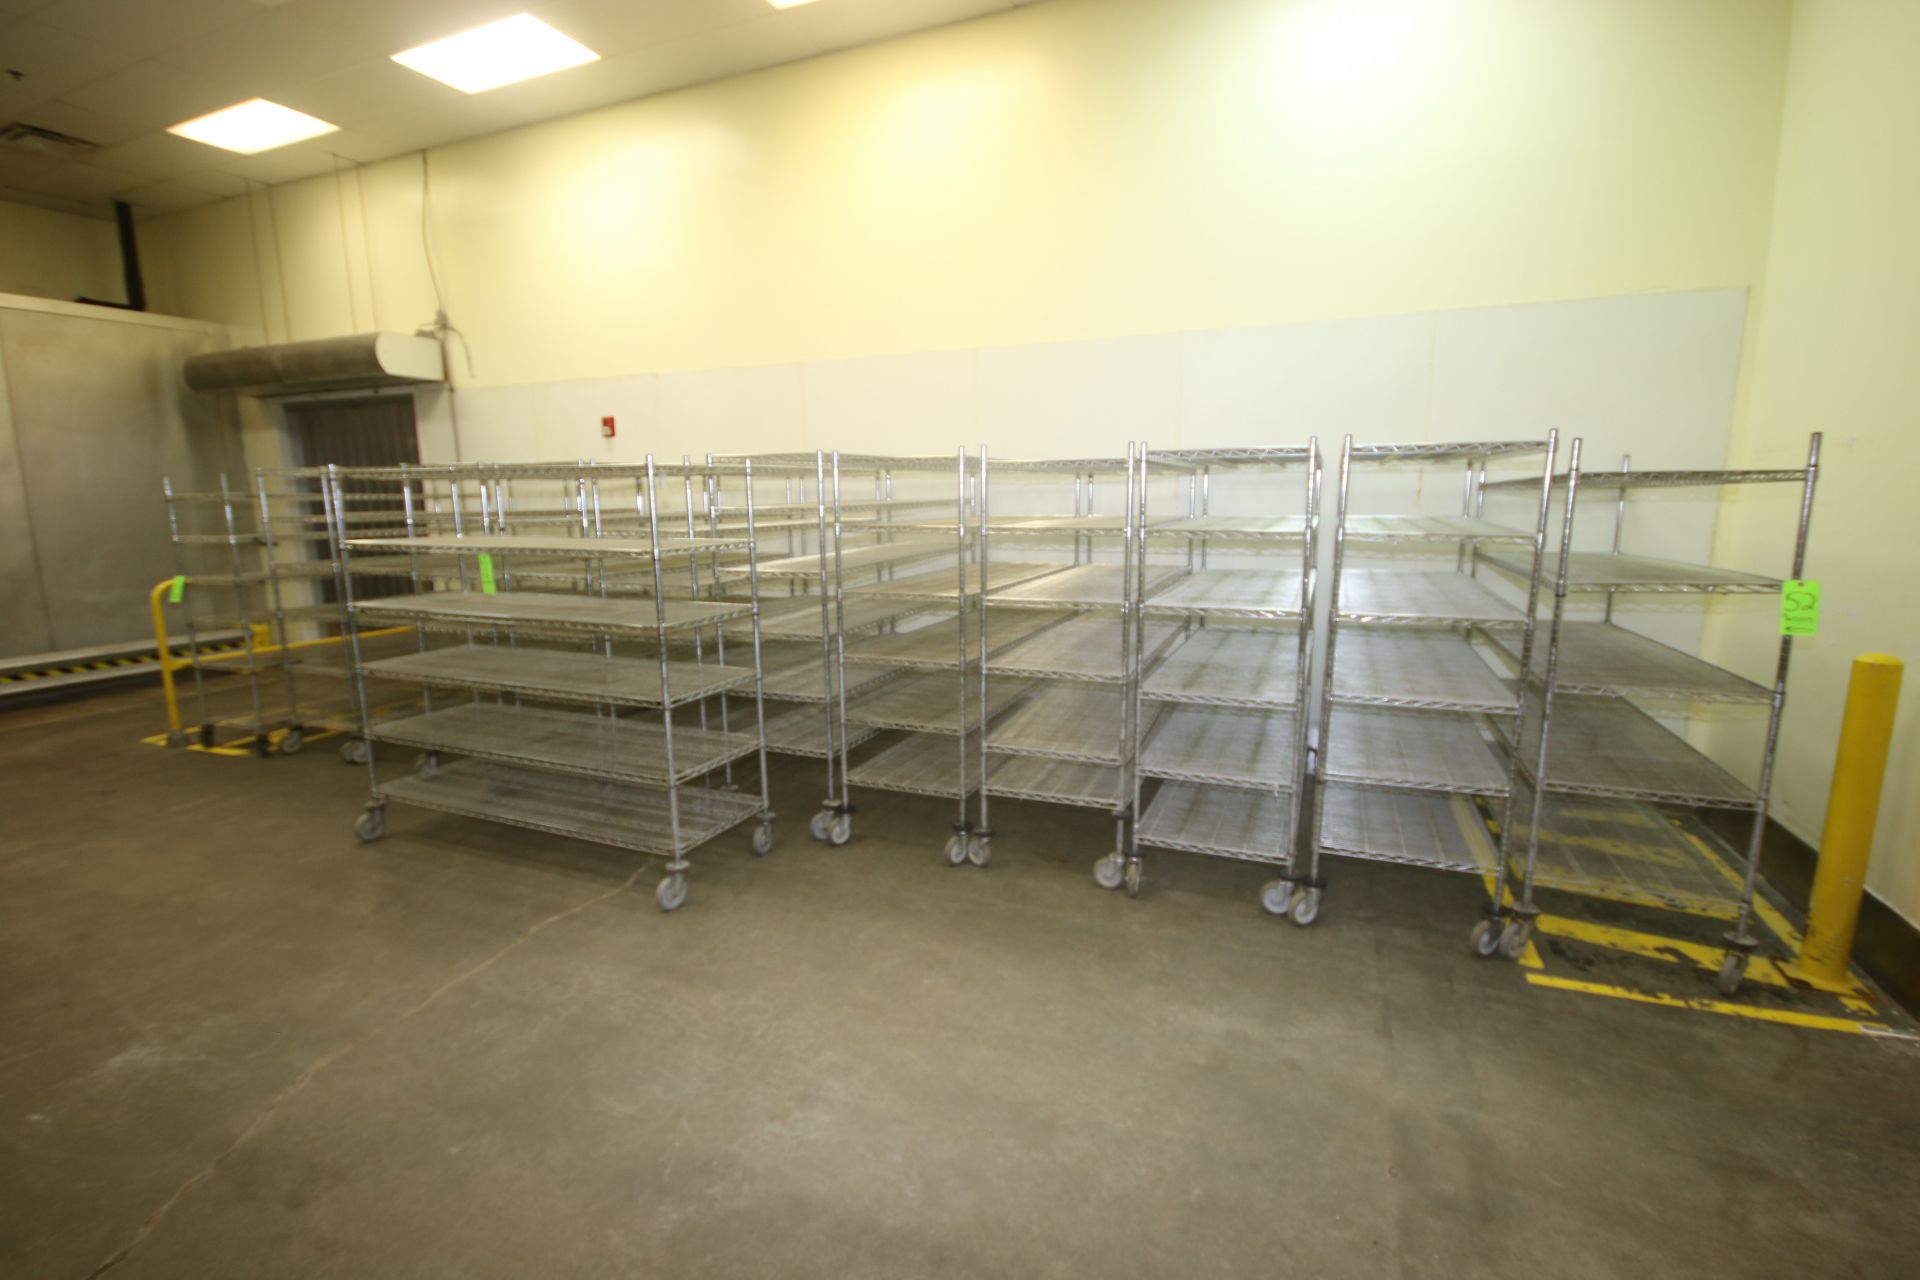 S/S Wire Shelving Units, Overall Dims.: Aprox. 72" L x 24" W x 69" H, Mounted on Casters (LOCATED AT